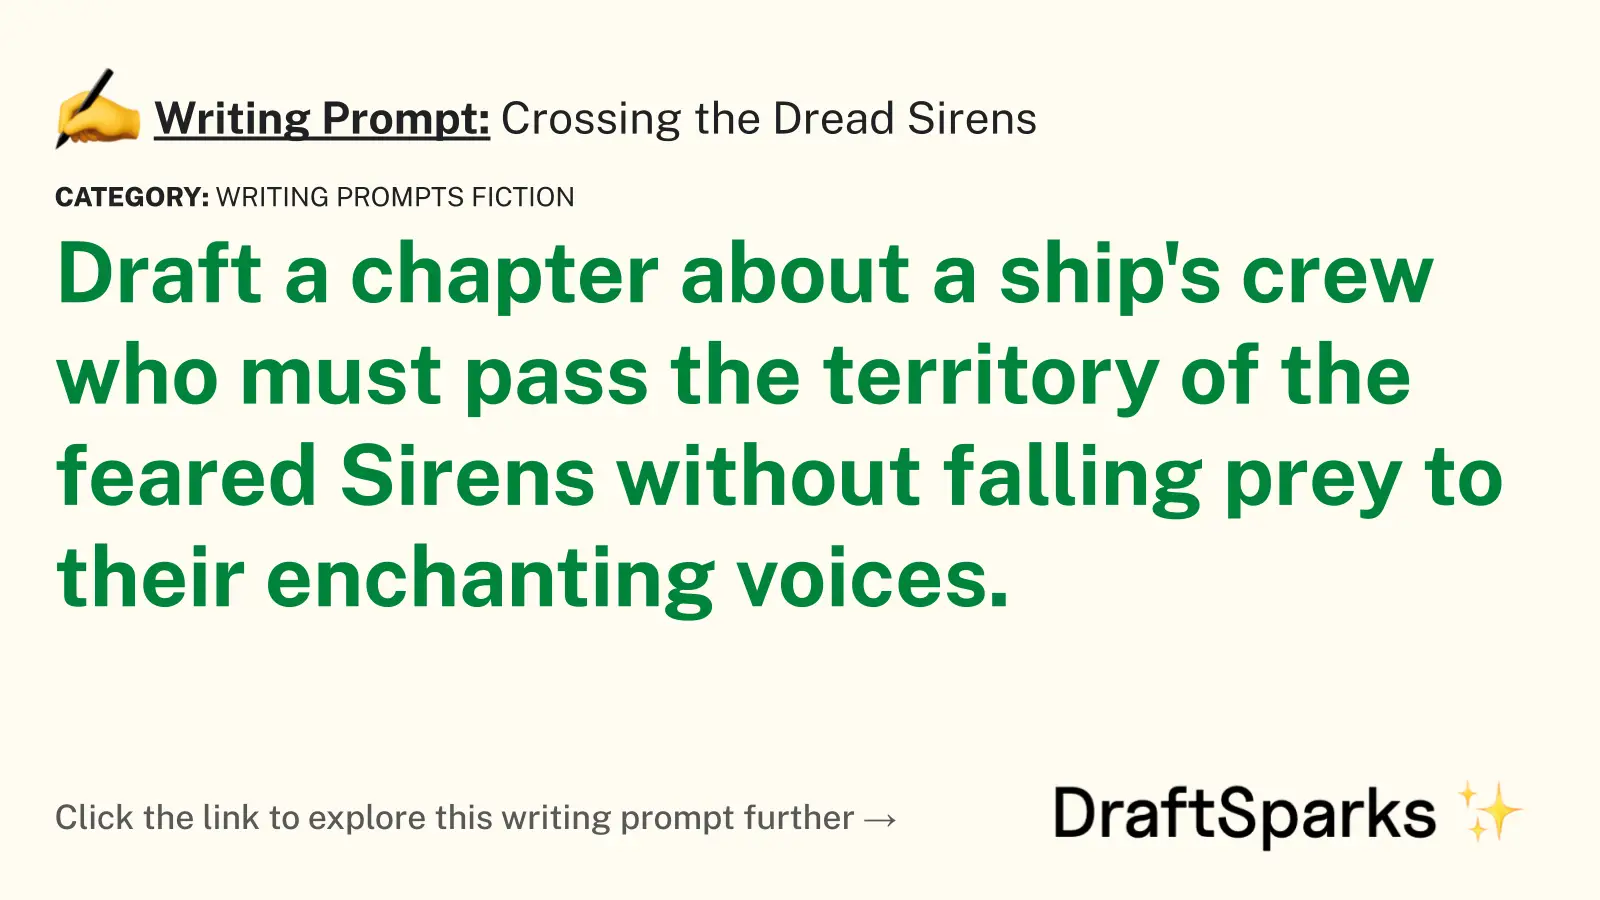 Crossing the Dread Sirens